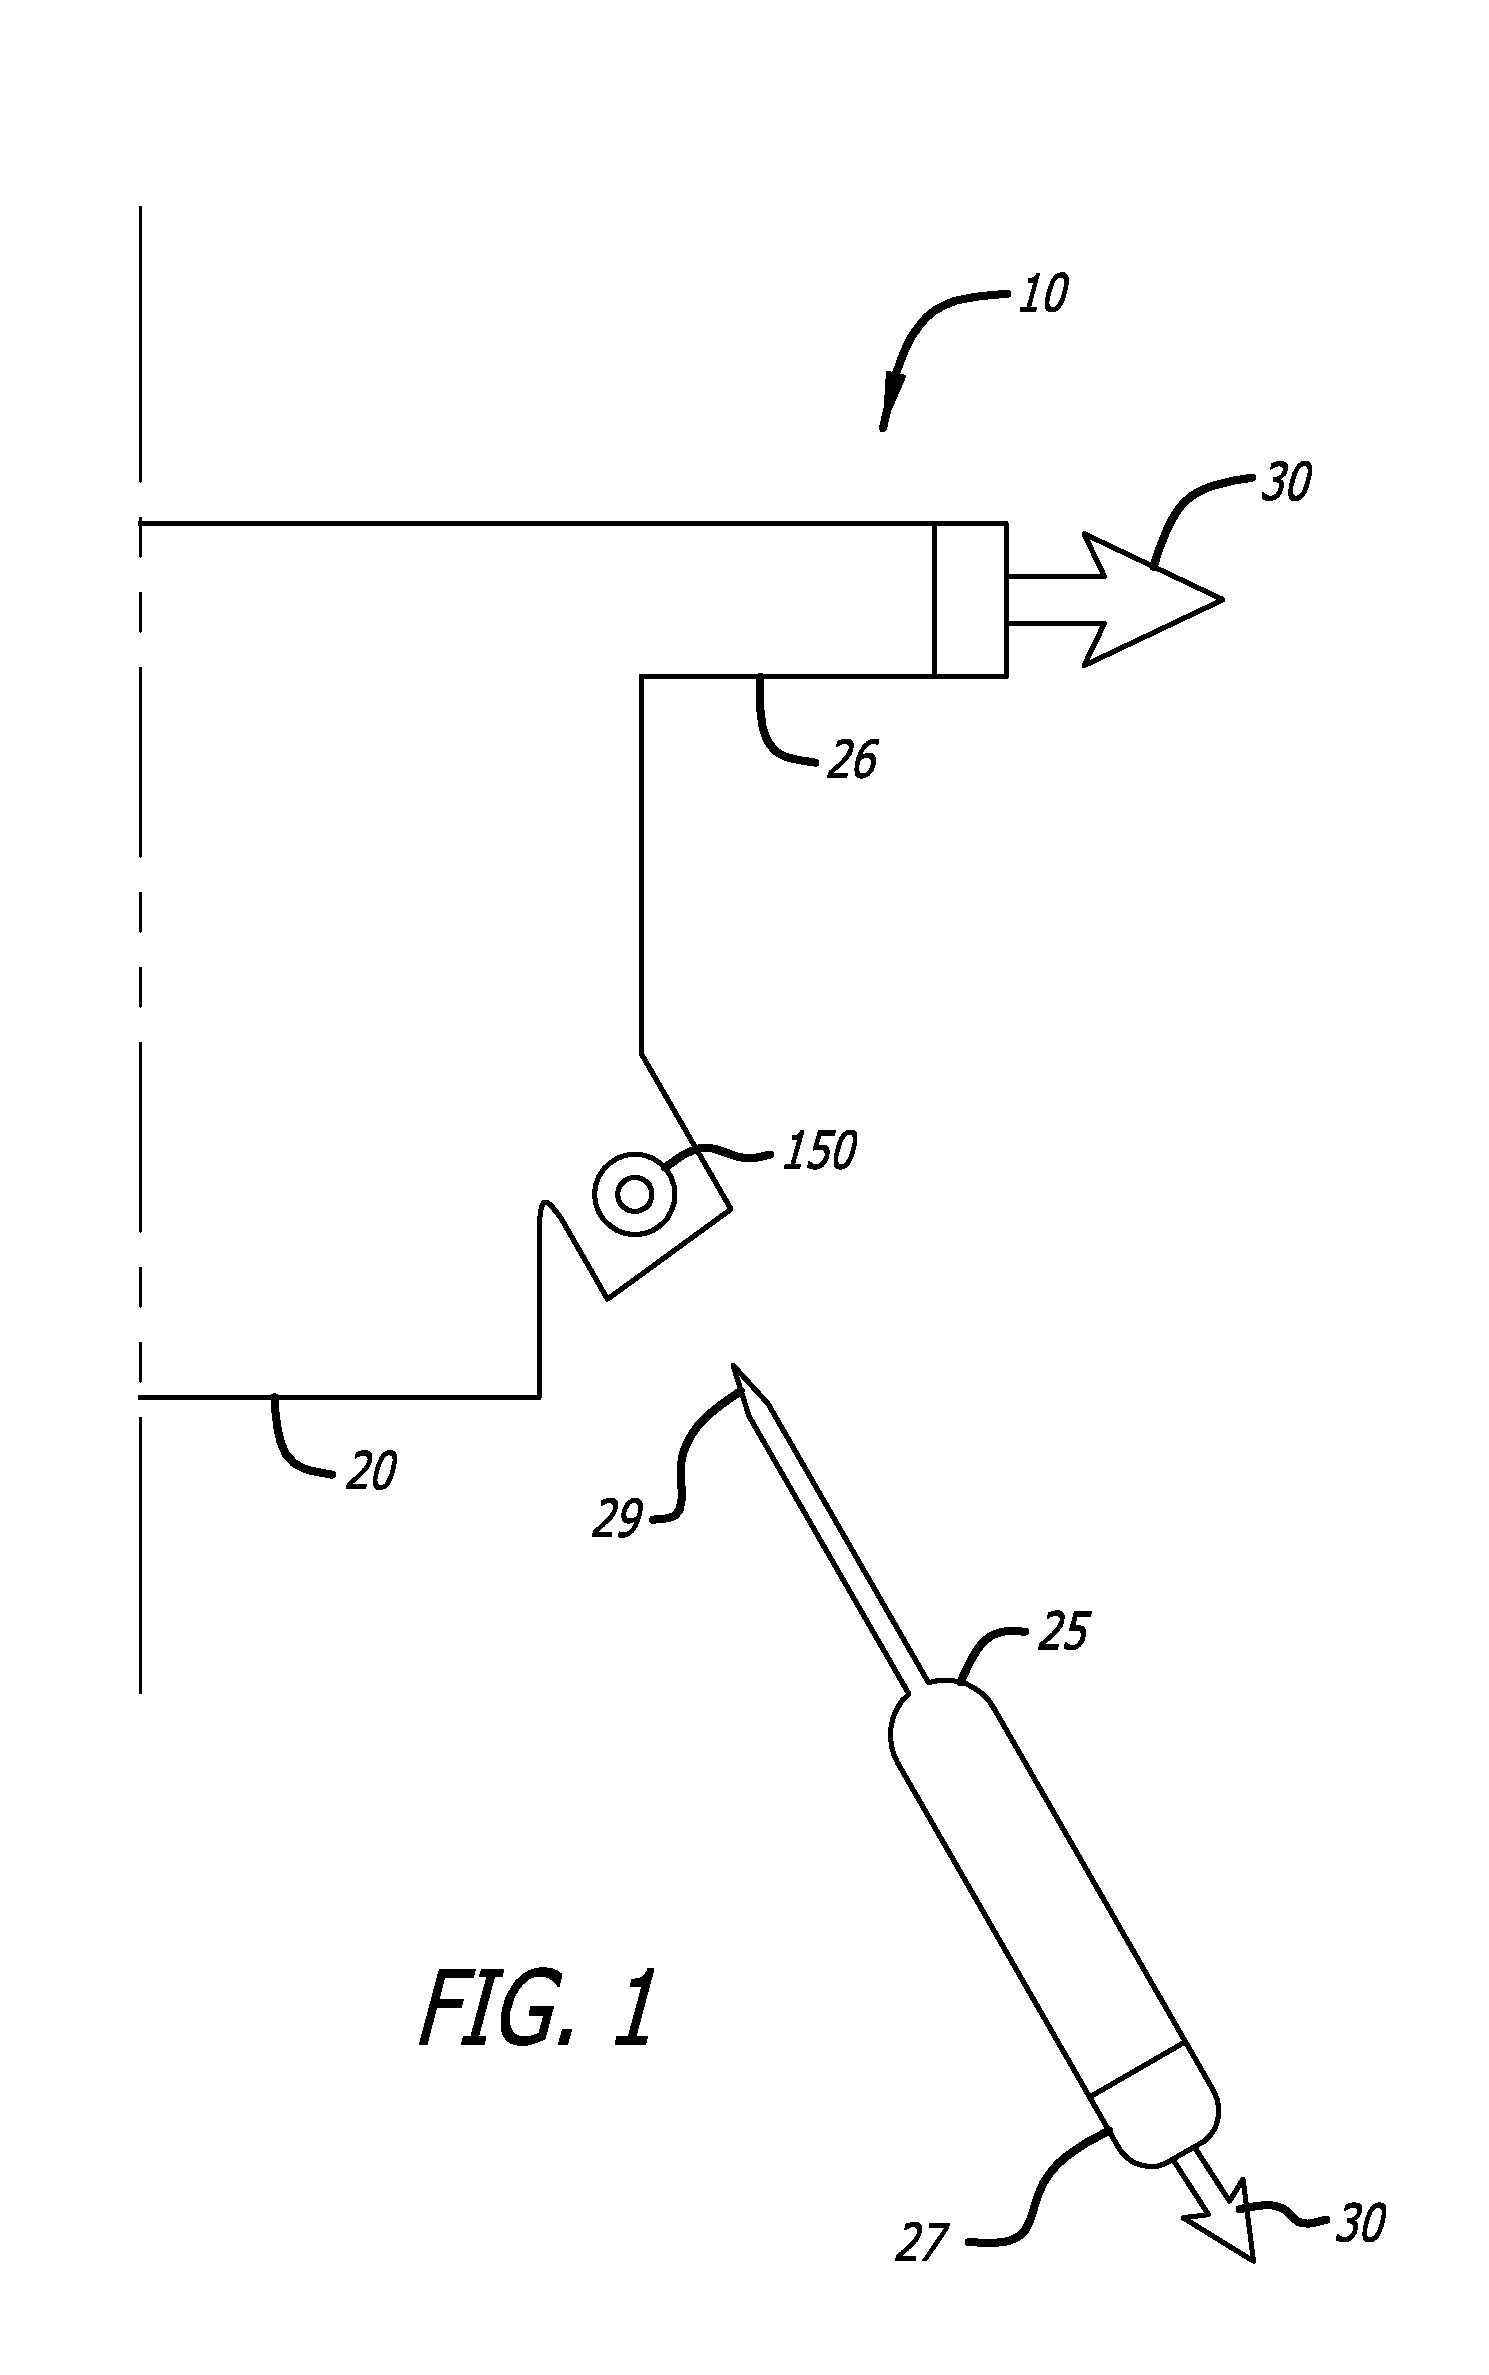 Implants And Procedures For Supporting Anatomical Structures